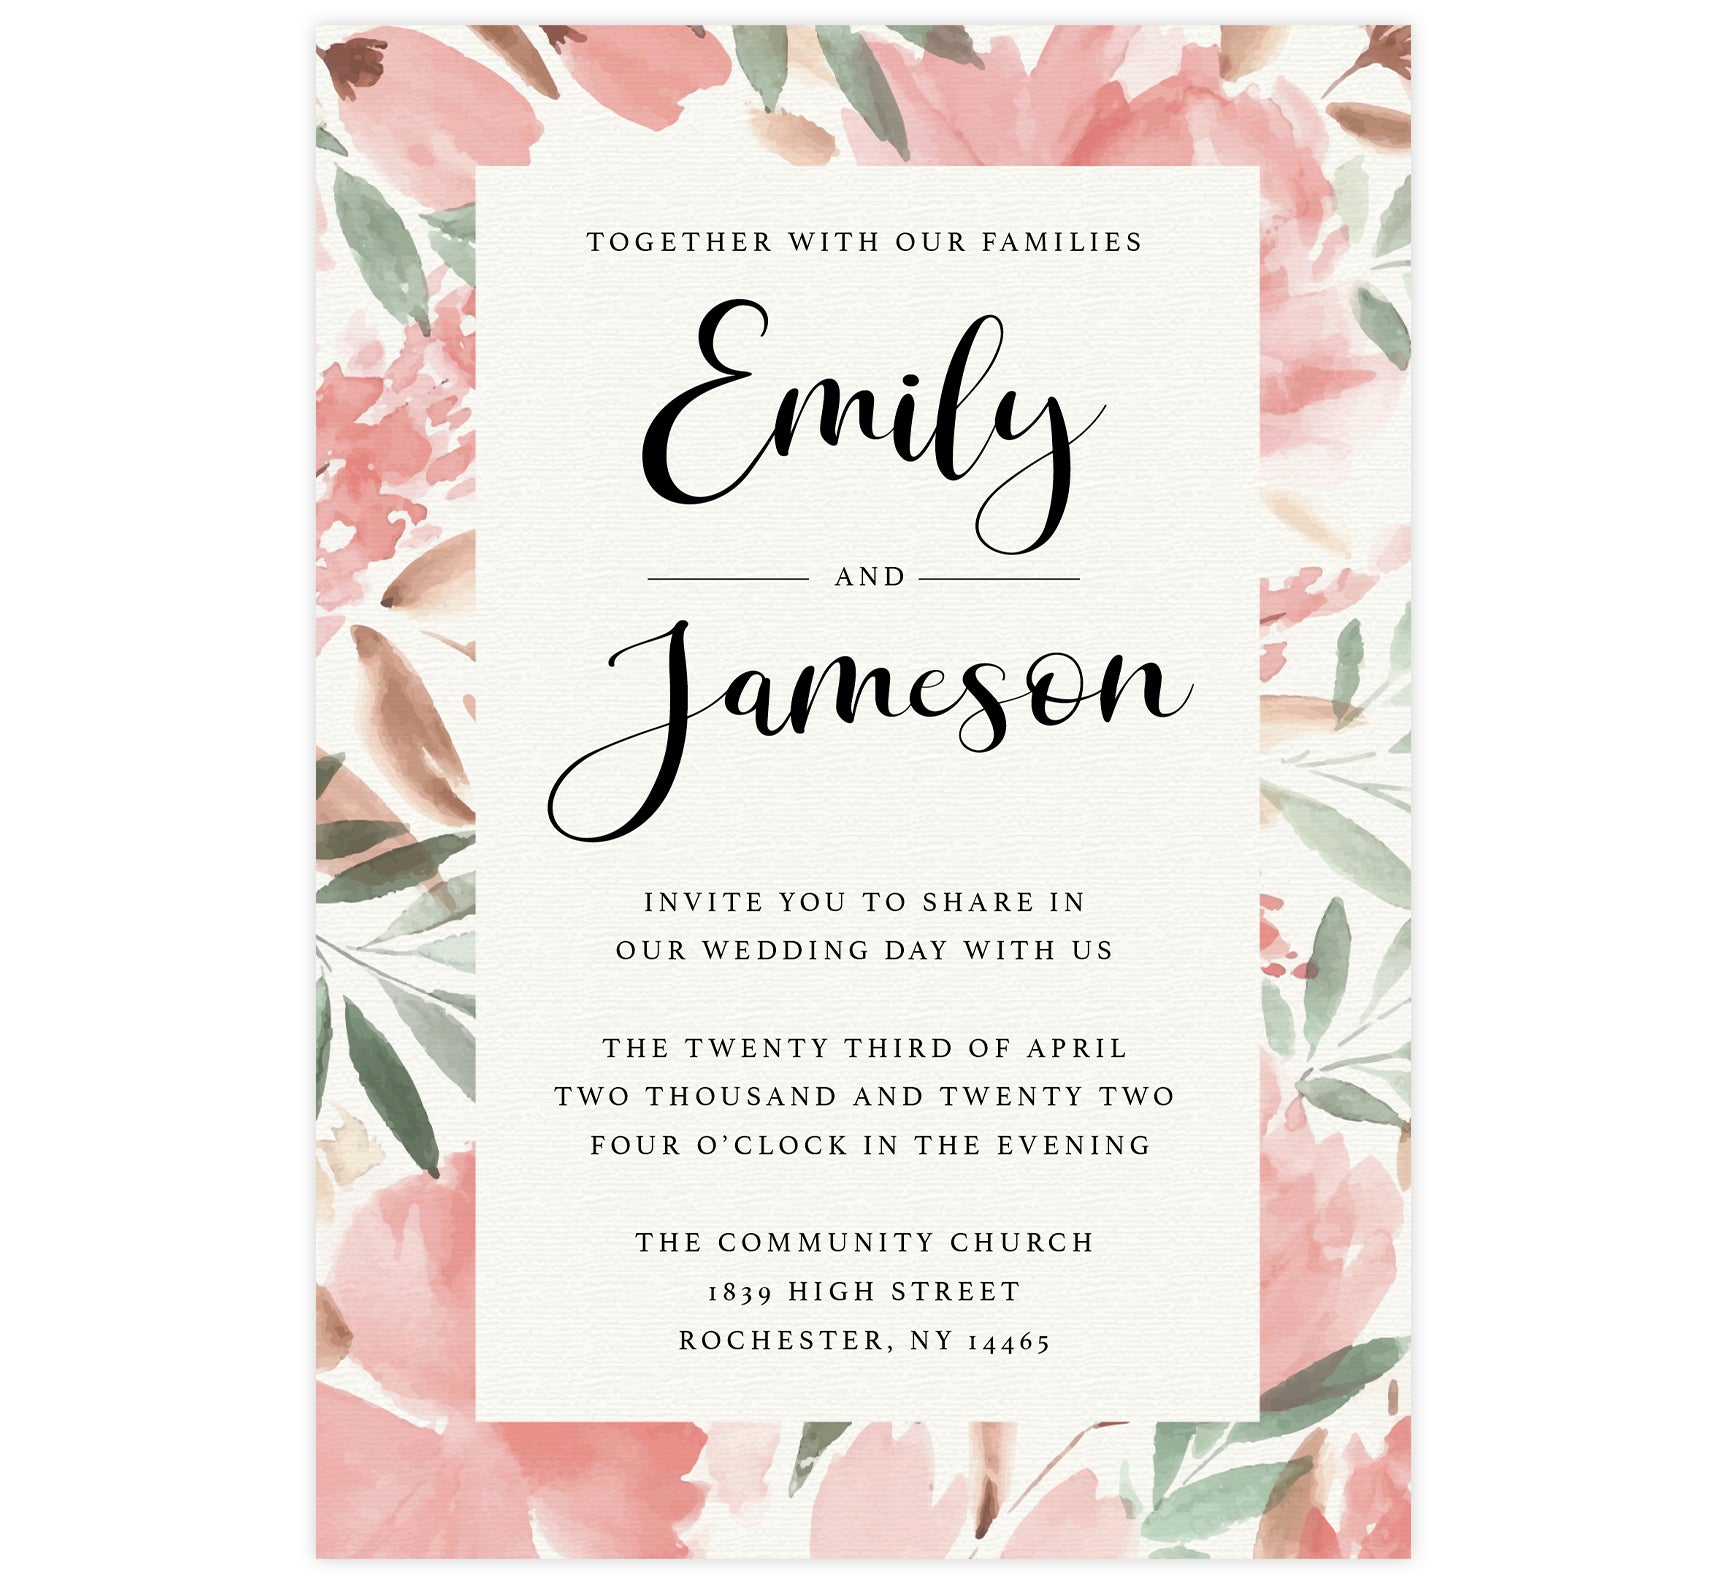 Bright and Beautiful wedding invitation; textured paper background with large watercolor pink floral frame and black text